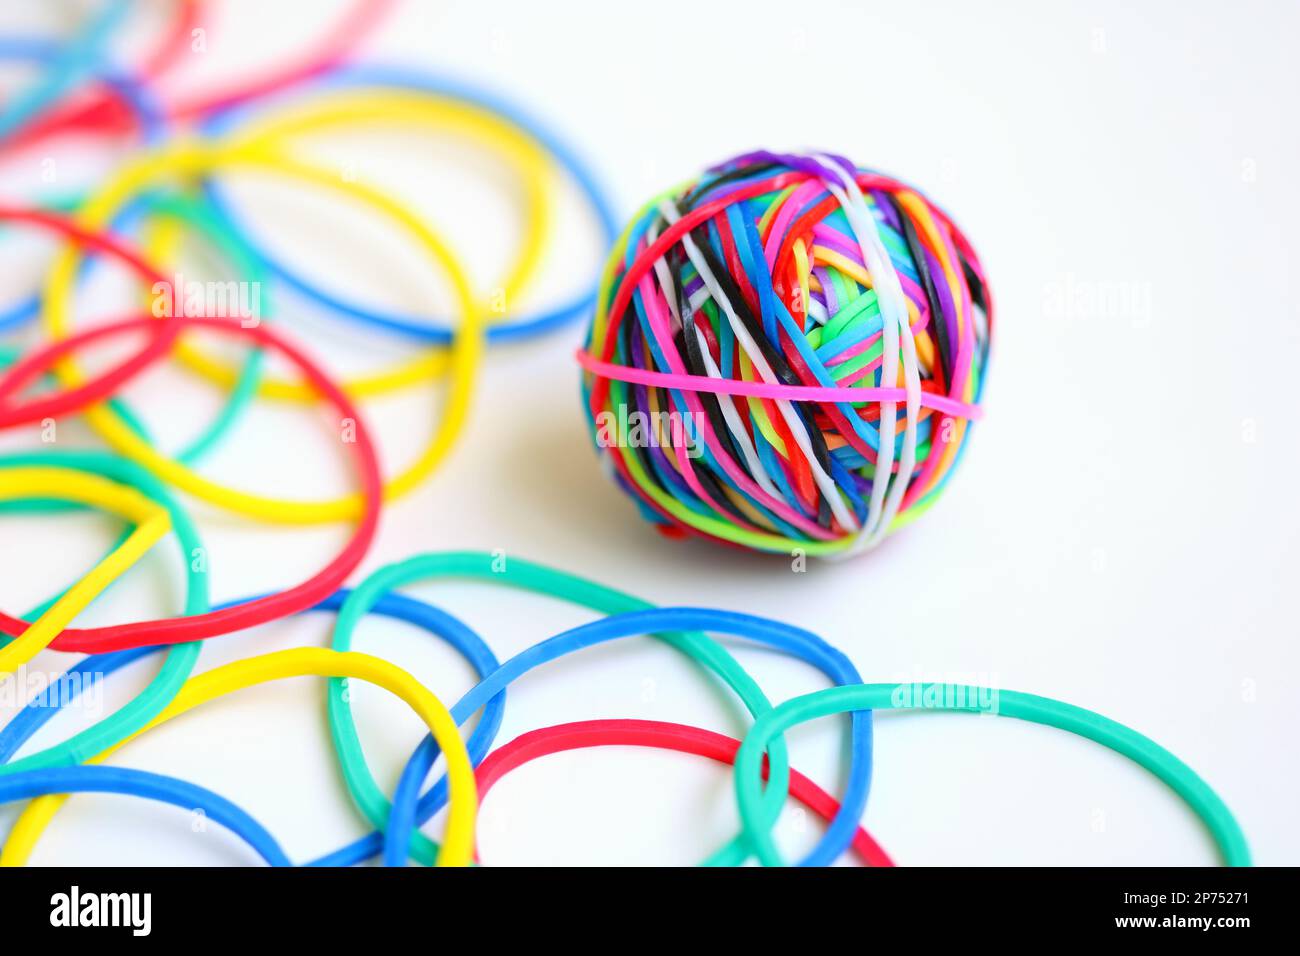 Colorful rubber band ball on white background Stock Photo